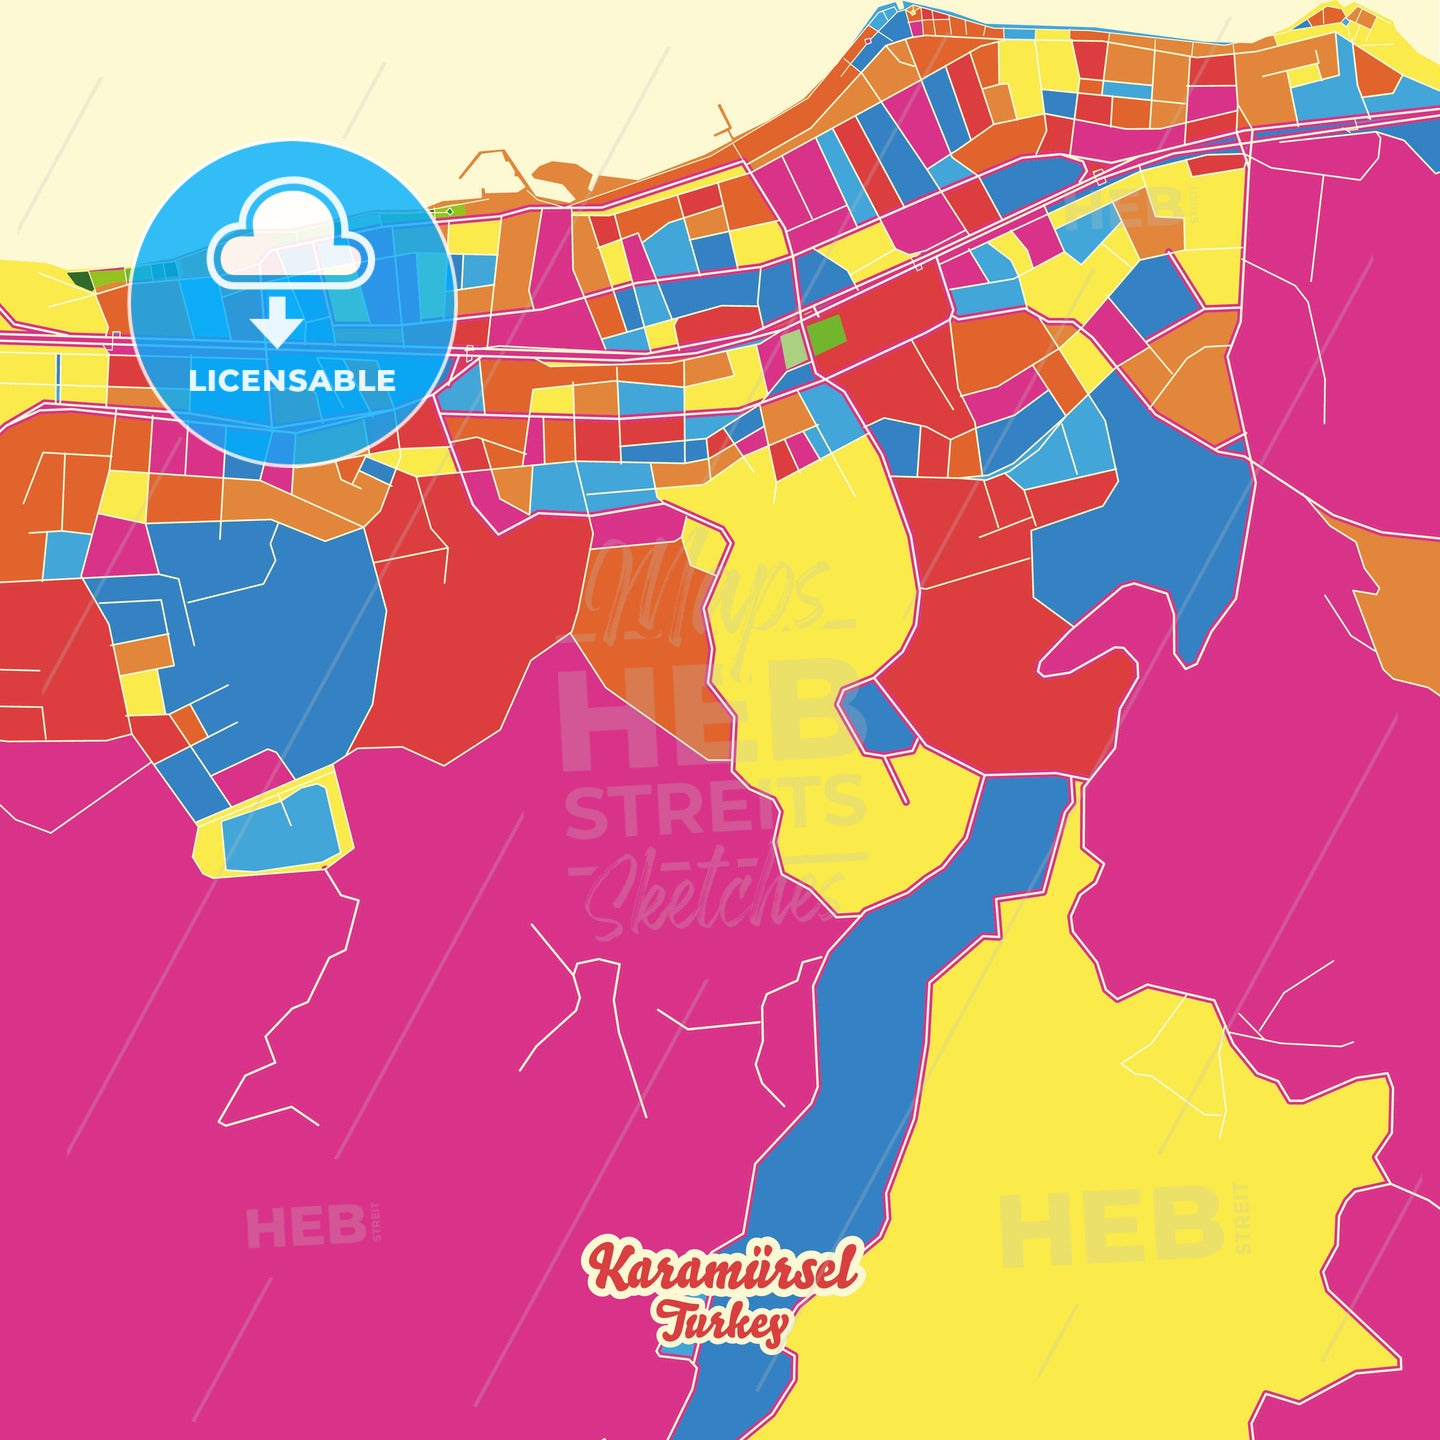 Karamürsel, Turkey Crazy Colorful Street Map Poster Template - HEBSTREITS Sketches